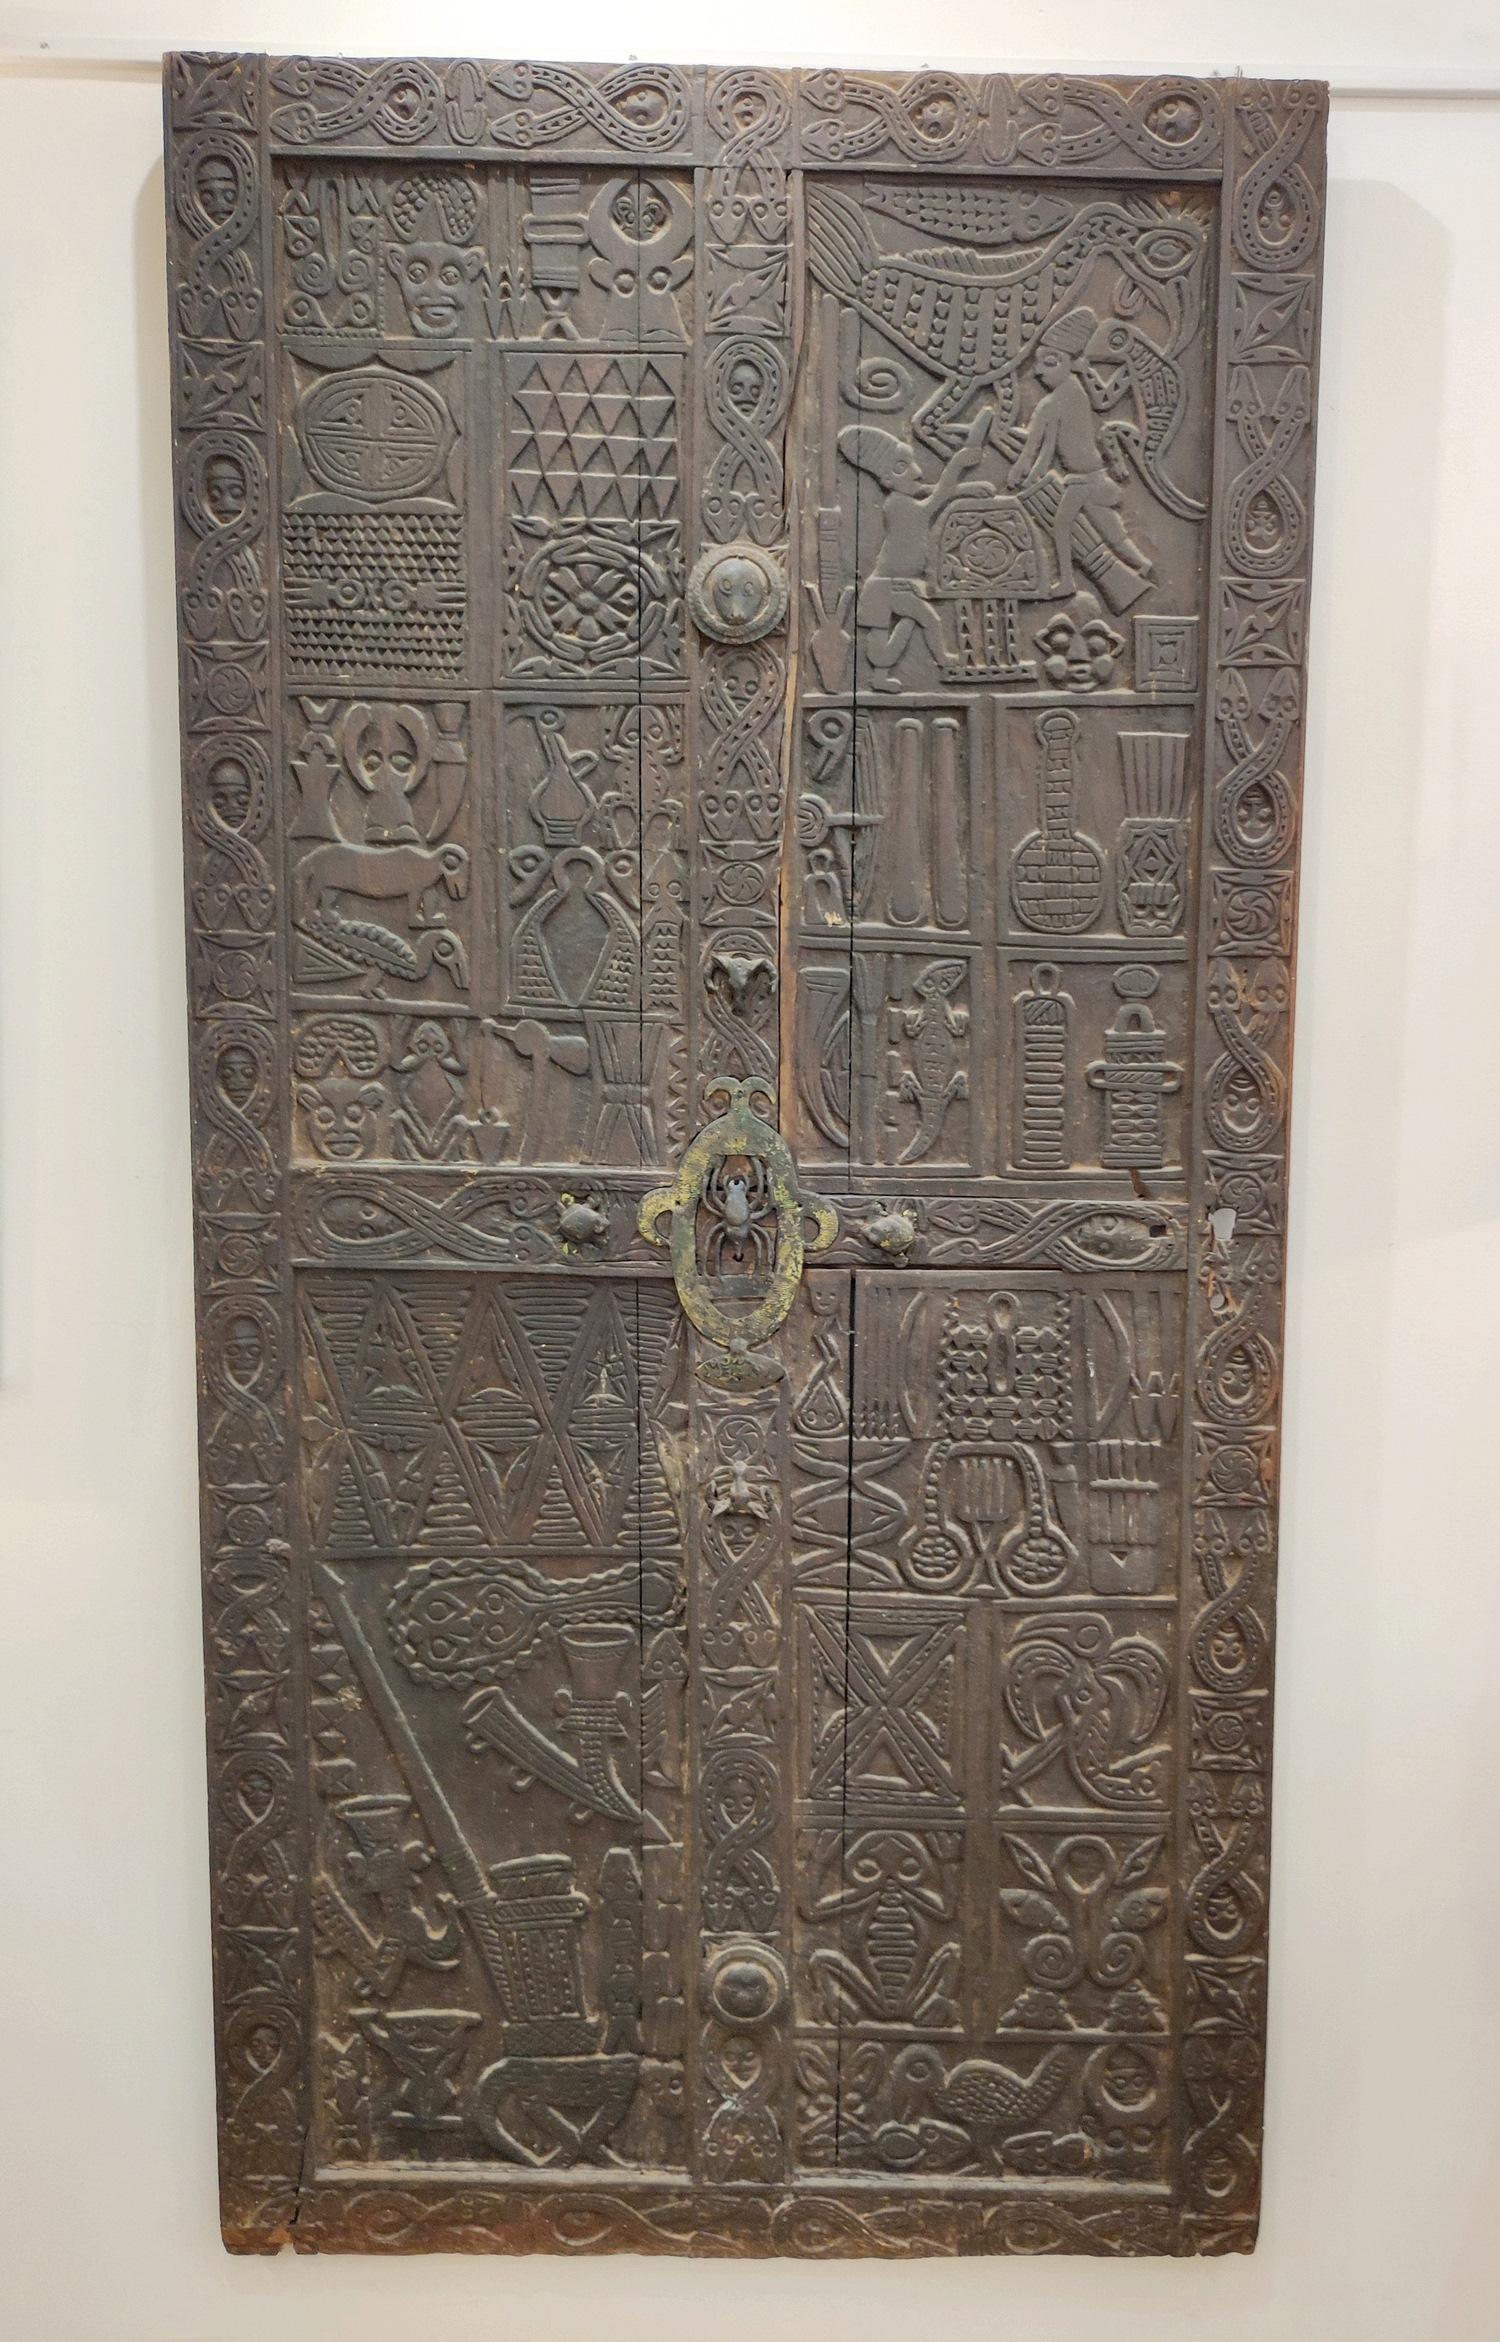 Spectacular Bamoun ( Cameroon)door end of XIX°century from Sultan NJOYA Palace.
It would be the door to the sultan's bedroom.
Very fine sculpting  work with Royal attributes like the snakes, and metal inserts.